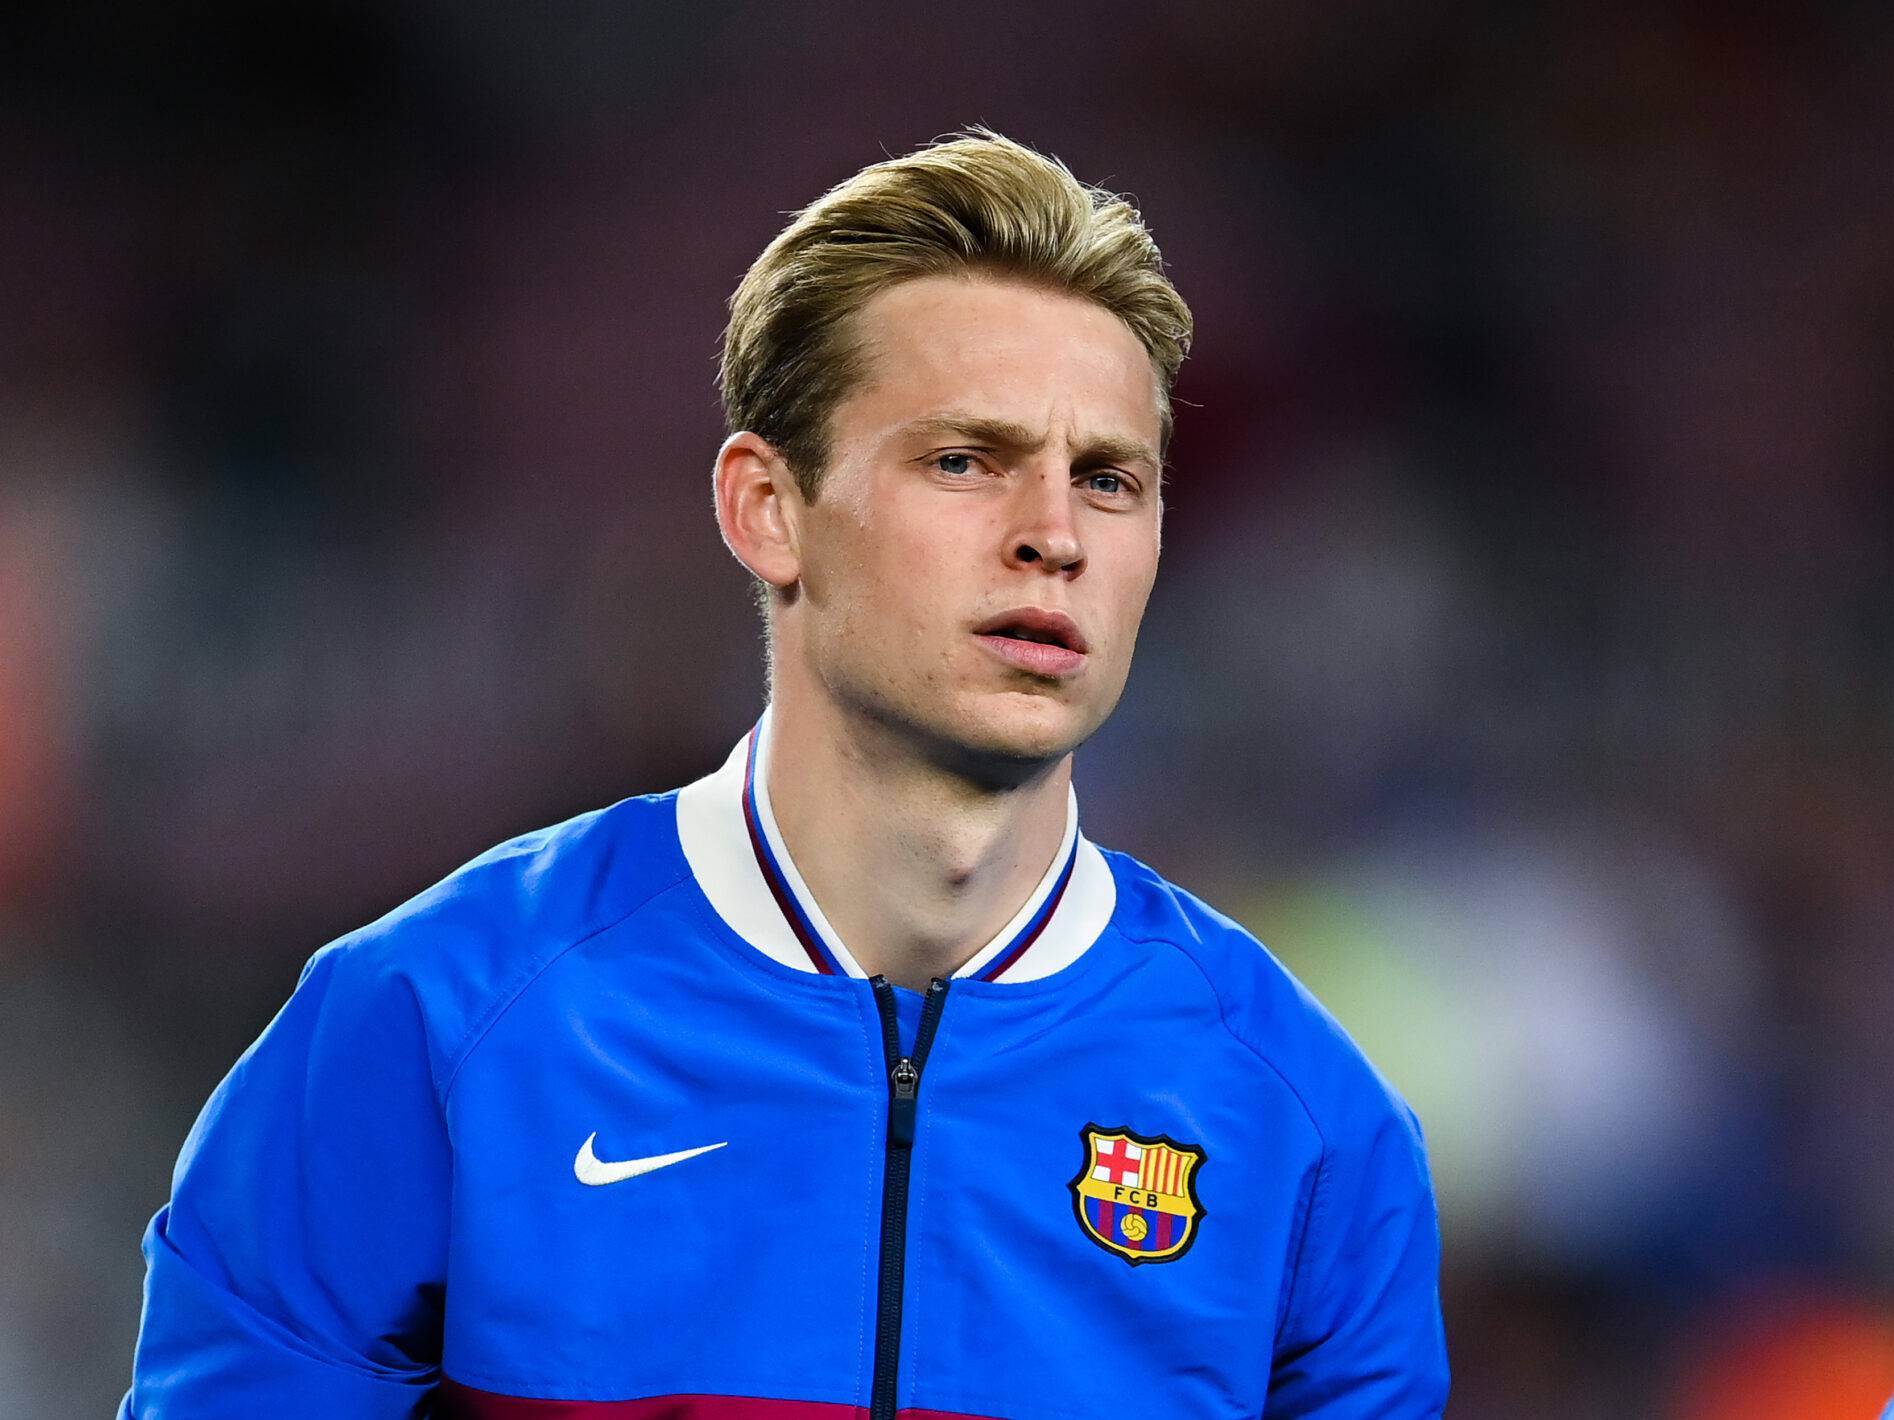 Frenkie de Jong’s list of ’10 reasons’ for rejecting Manchester United move has emerged